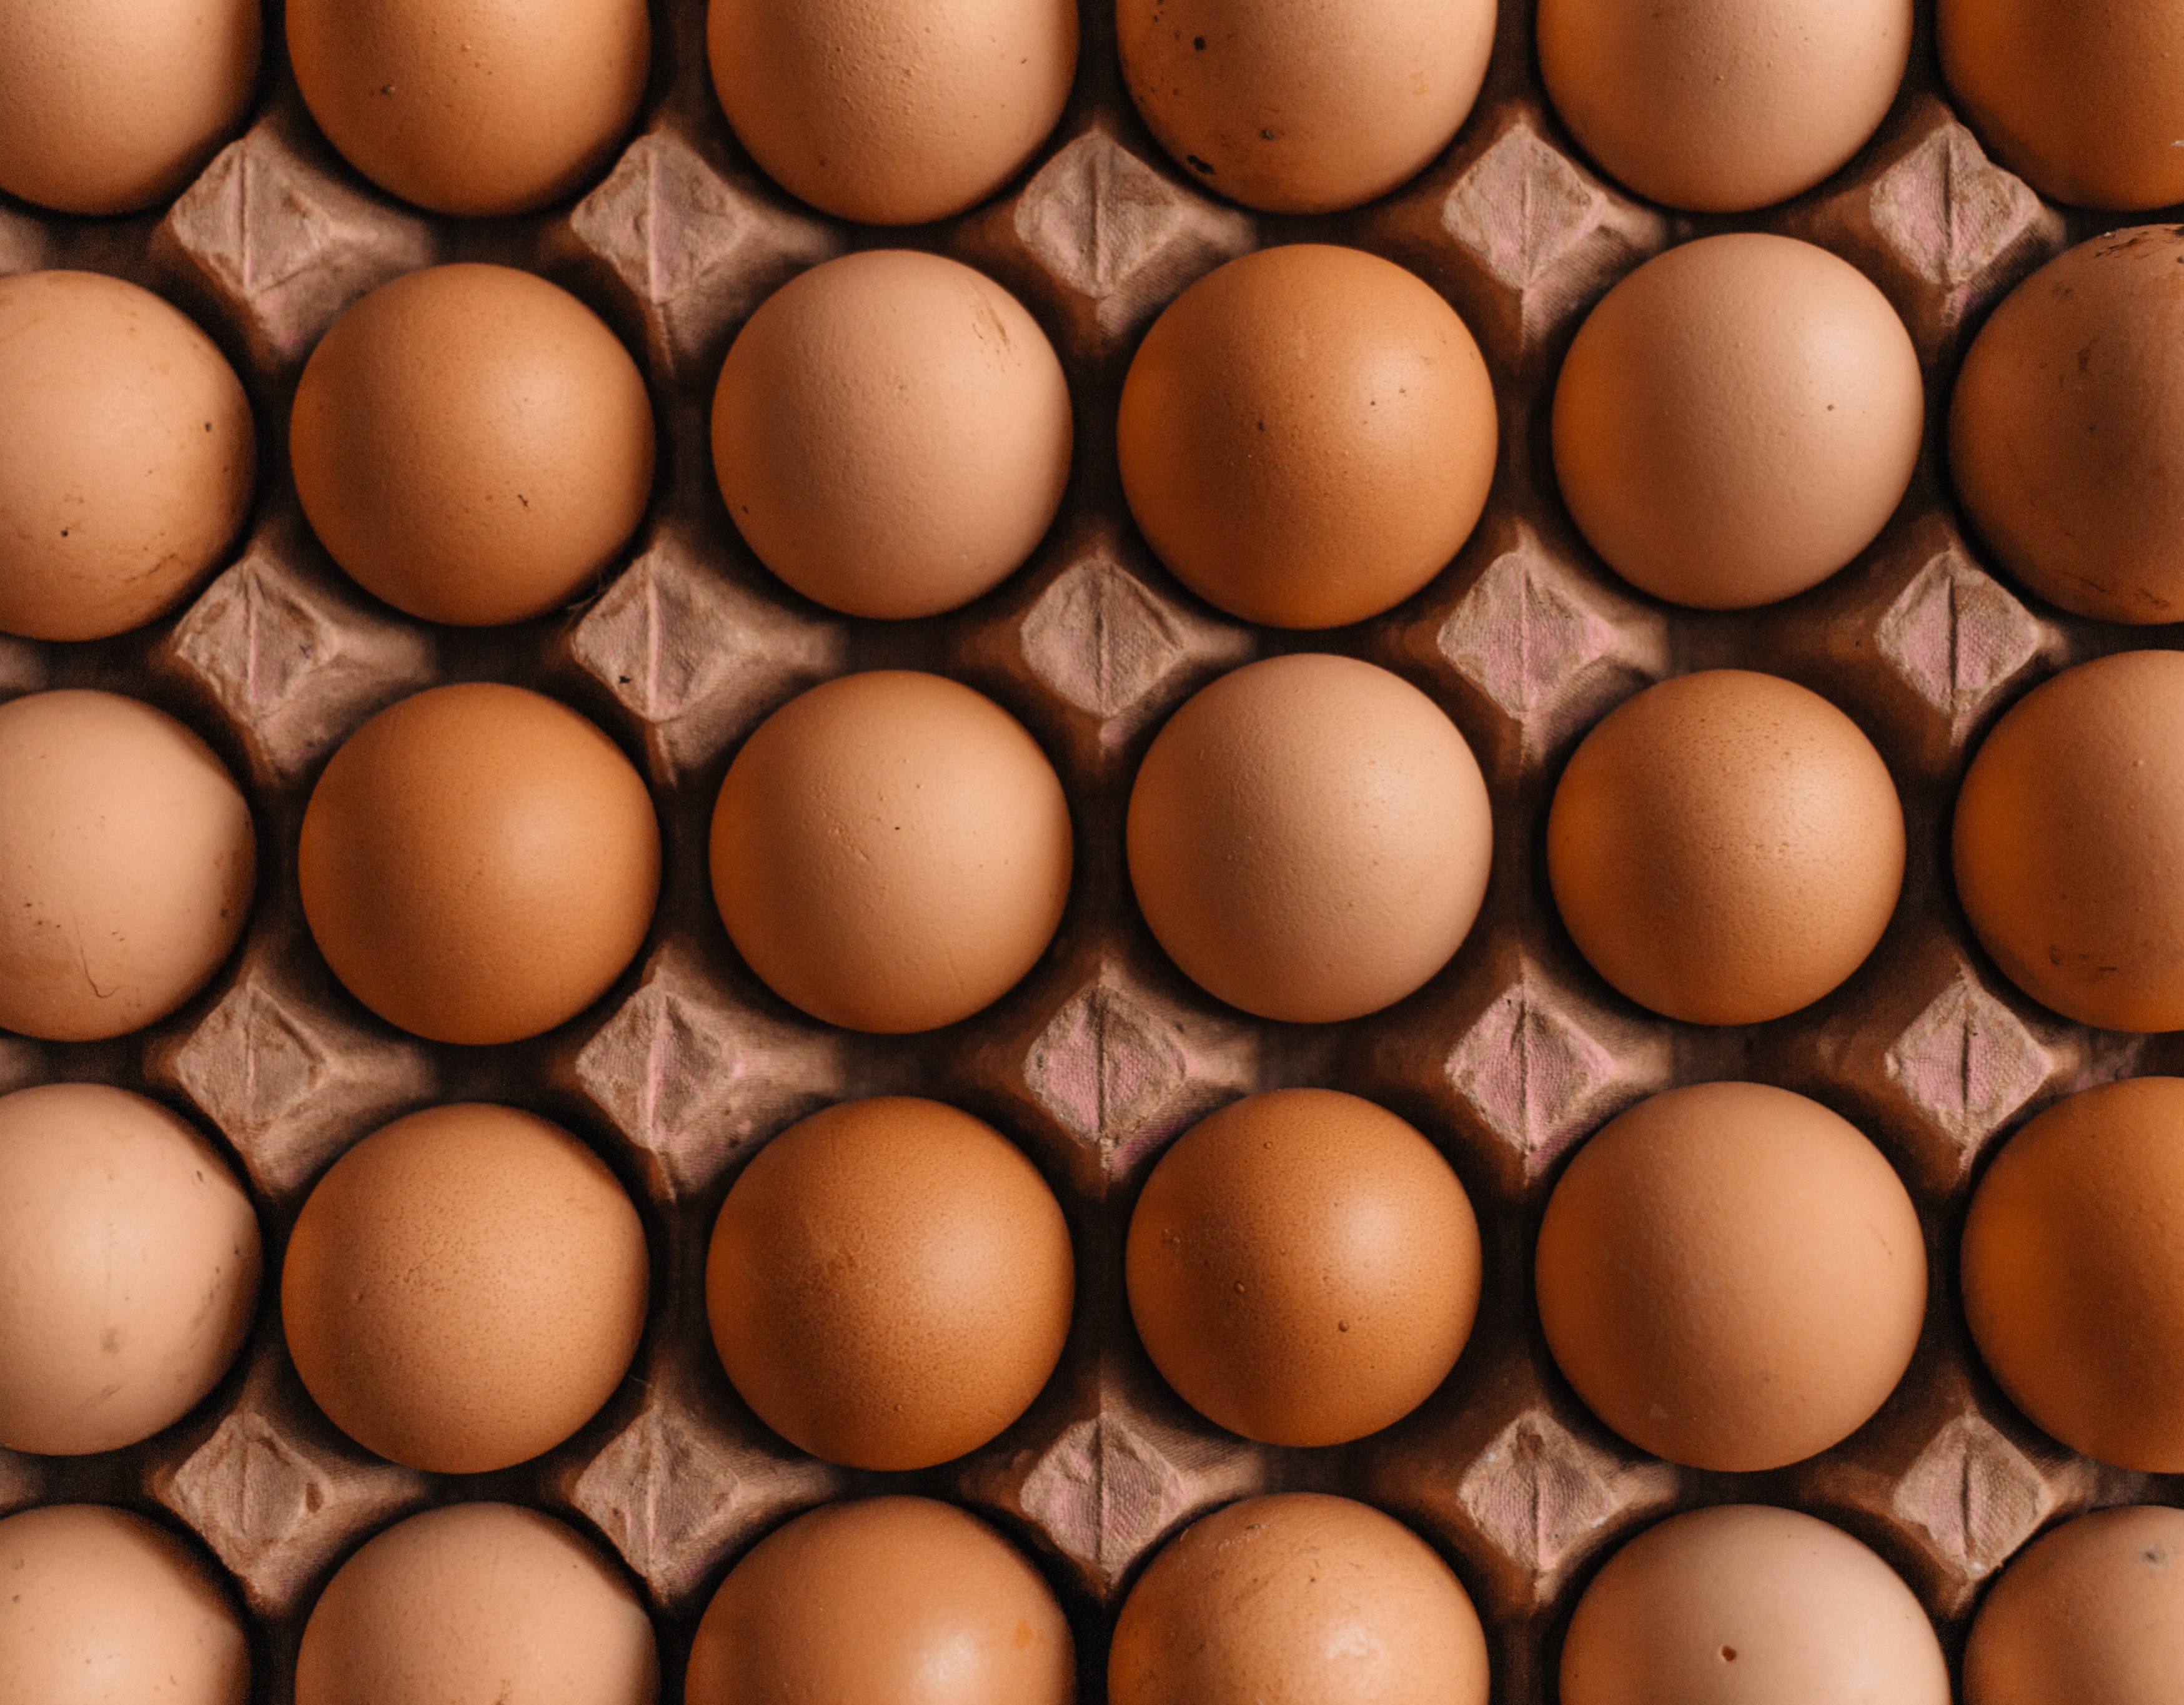 A closeup of a 5 x 5 carton of eggs as viewed from above